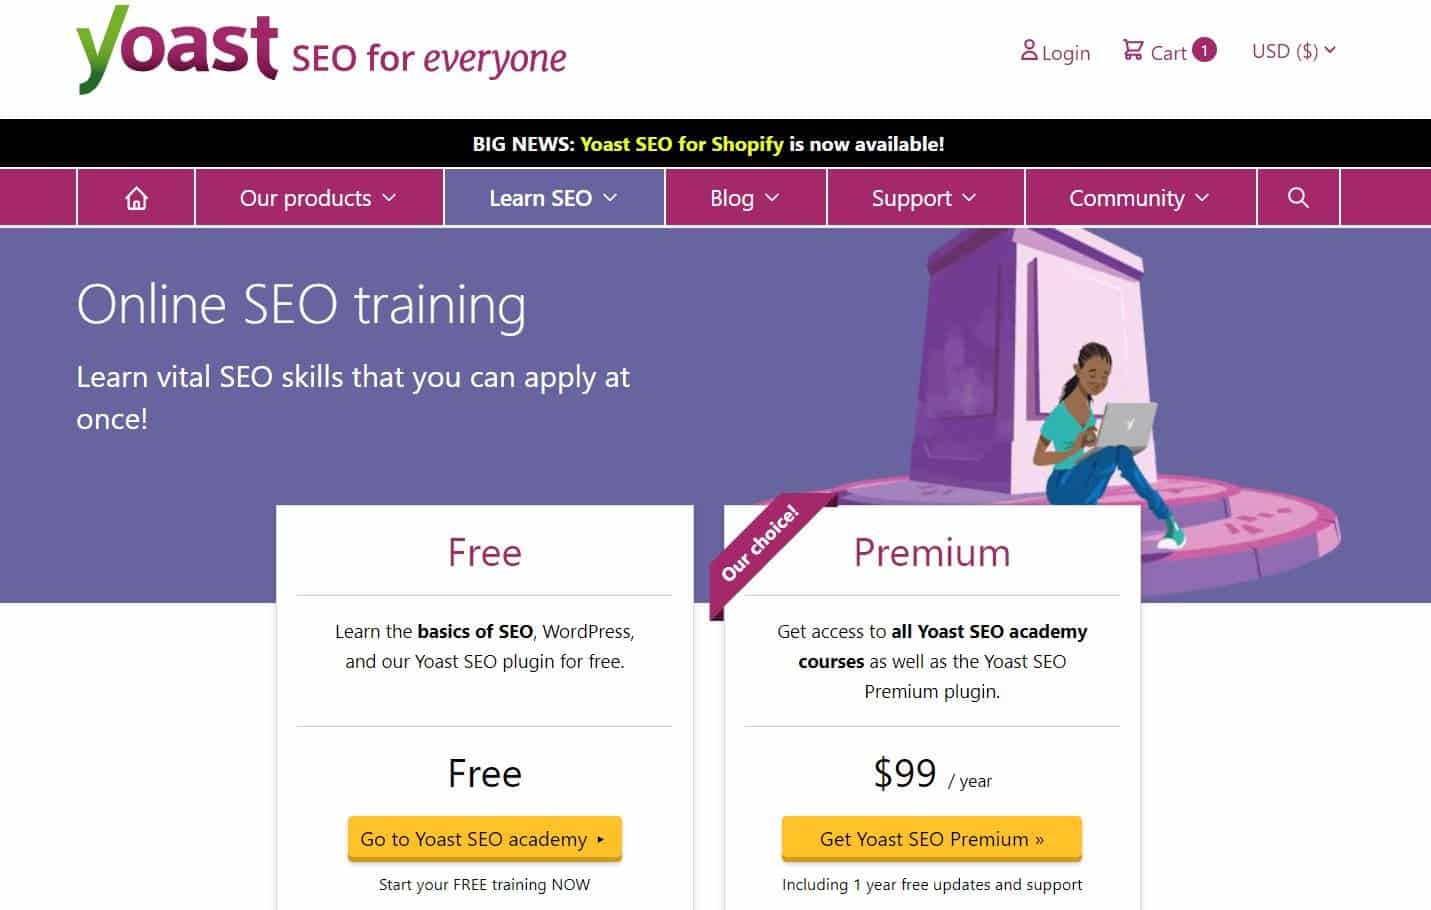 7-best-seo-training-courses-to-take-right-now 7-best-seo-training-courses-to-take-right-now 7-best-seo-training-courses-to-take-right-now